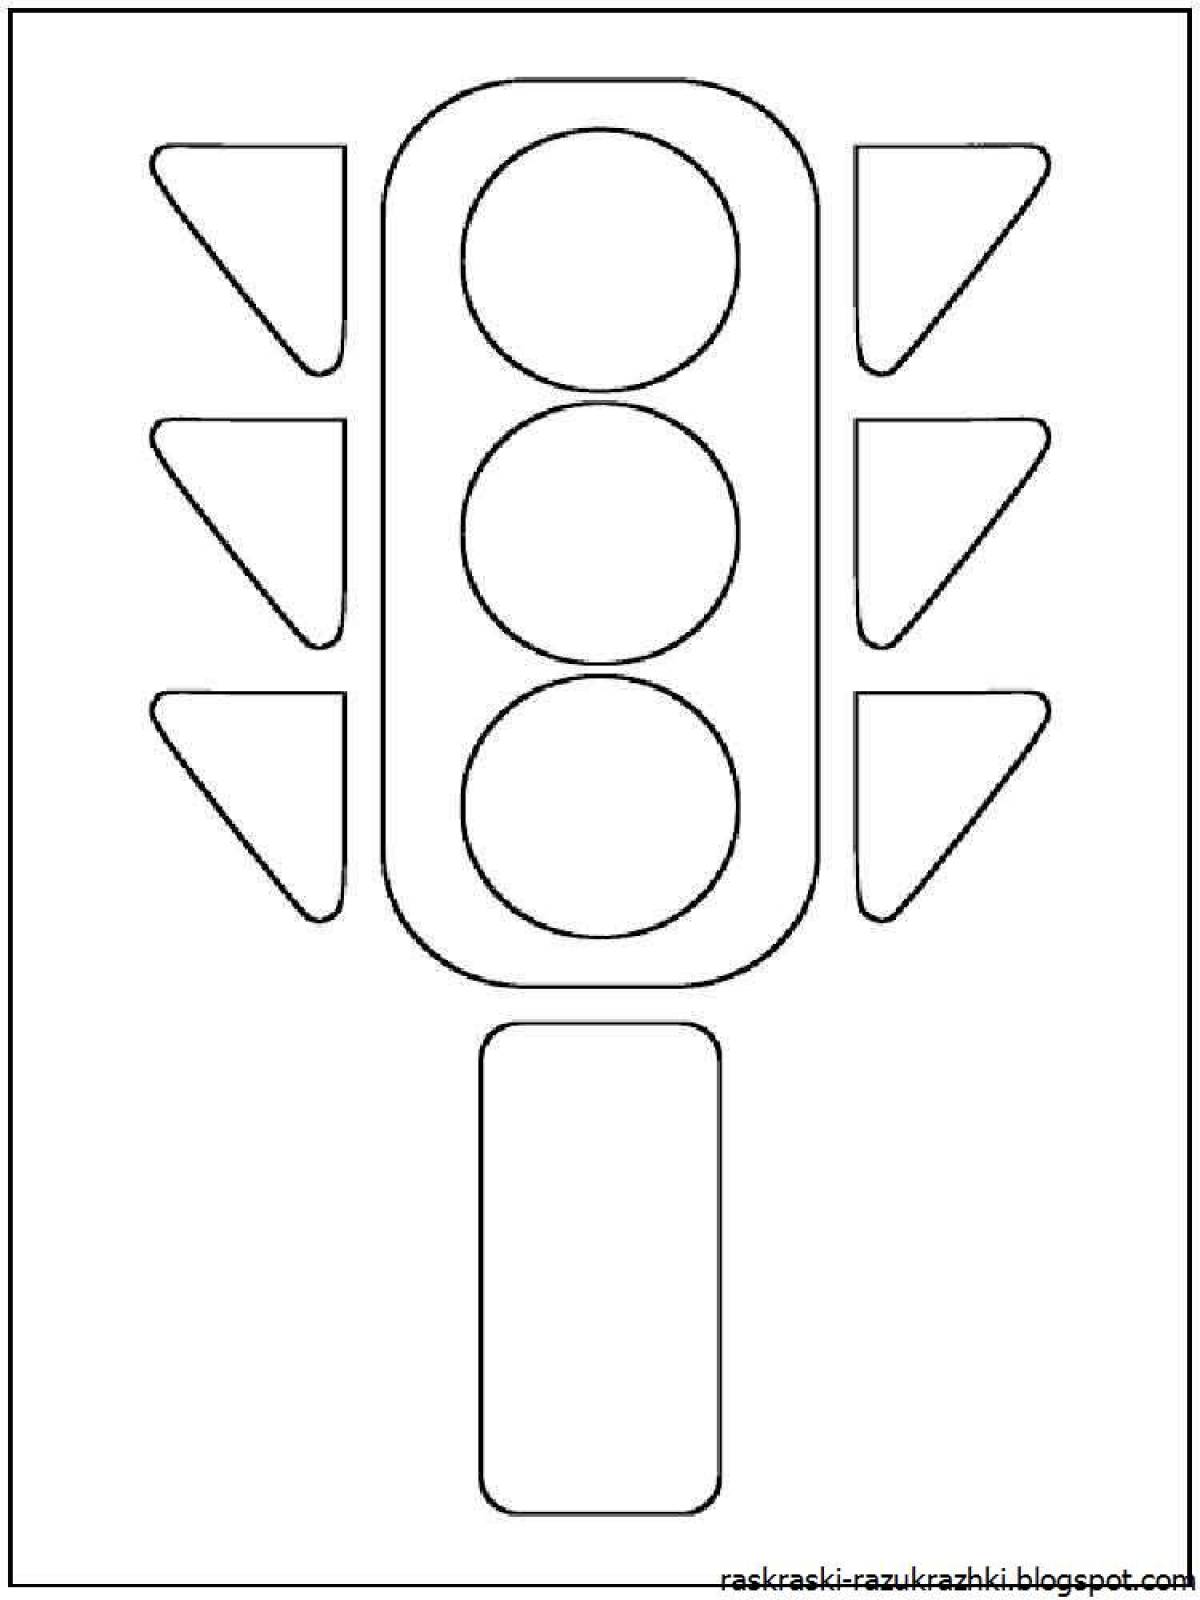 Adorable traffic light coloring book for 3-4 year olds